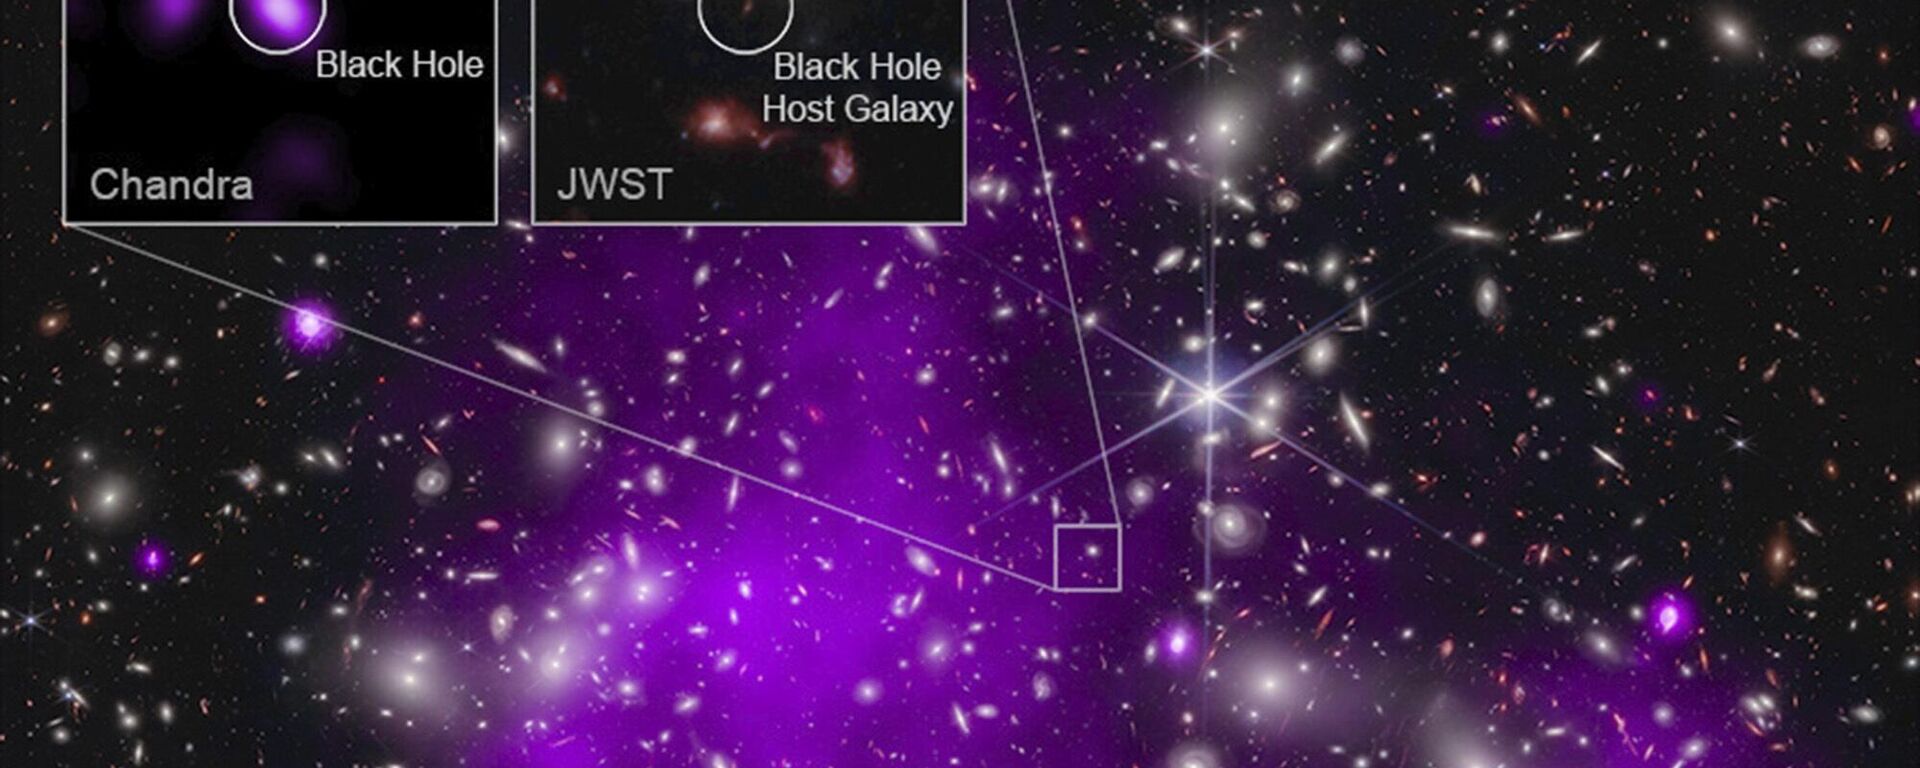 This annotated image provided by NASA on Monday, Nov. 6, 2023, shows a composite view of data from NASA’s Chandra X-ray Observatory and James Webb Space Telescope indicating a growing black hole just 470 million years after the big bang. It is the oldest black hole yet discovered.  - Sputnik International, 1920, 06.11.2023